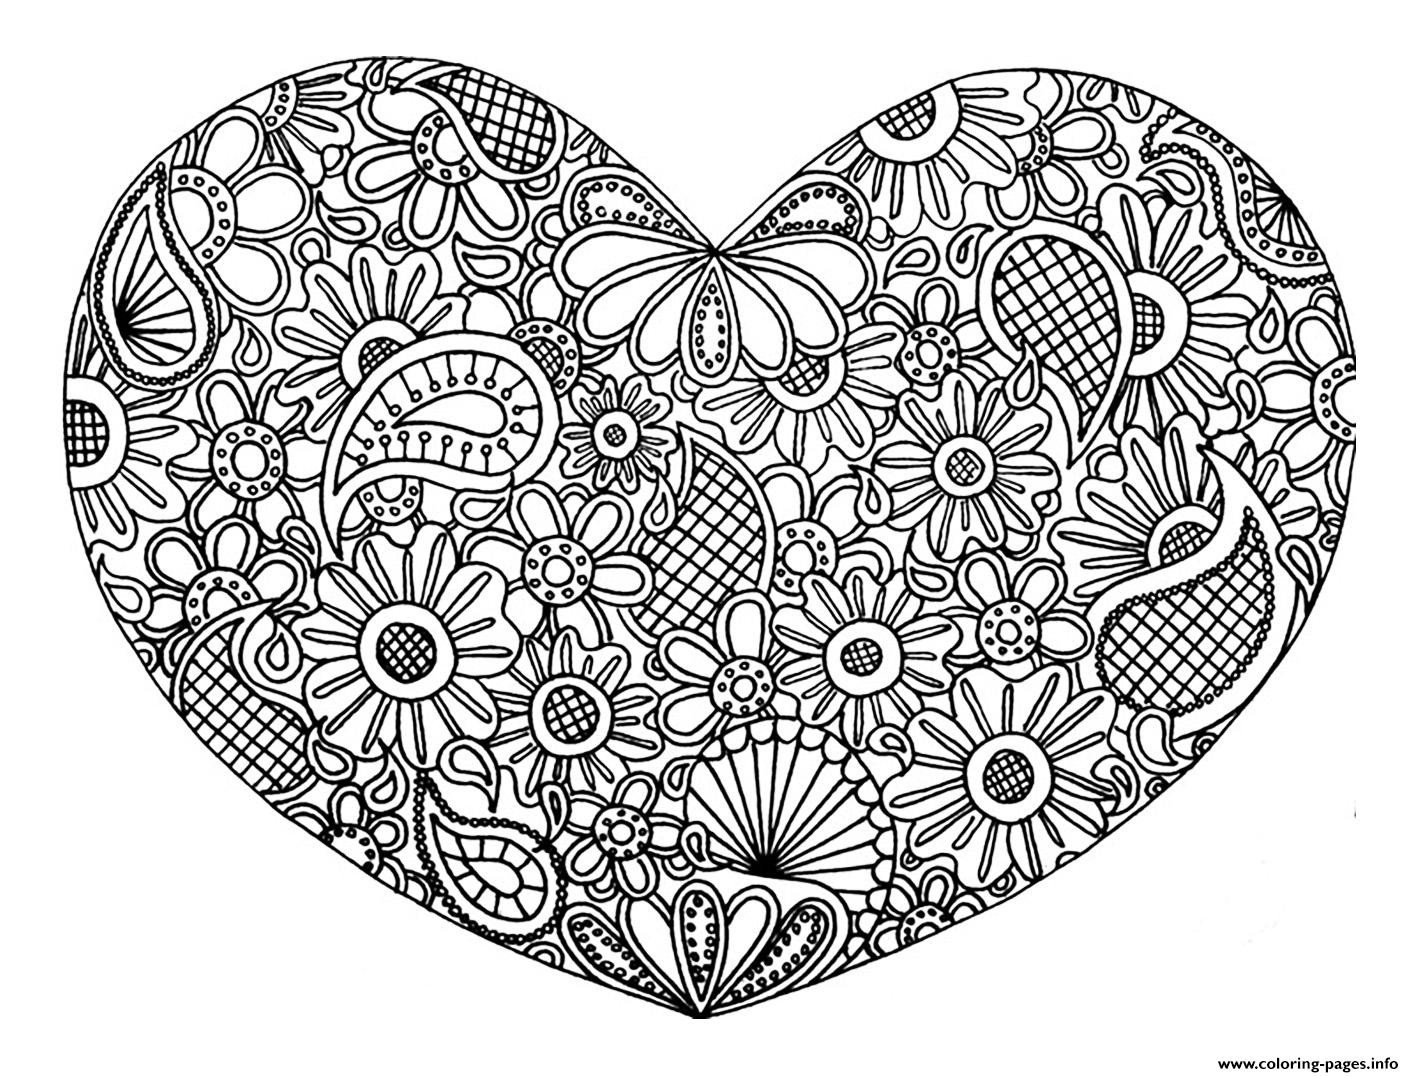 Coloring Book World: Mandala Coloring Pages For Adults. Free - Free Printable Mandala Coloring Pages For Adults